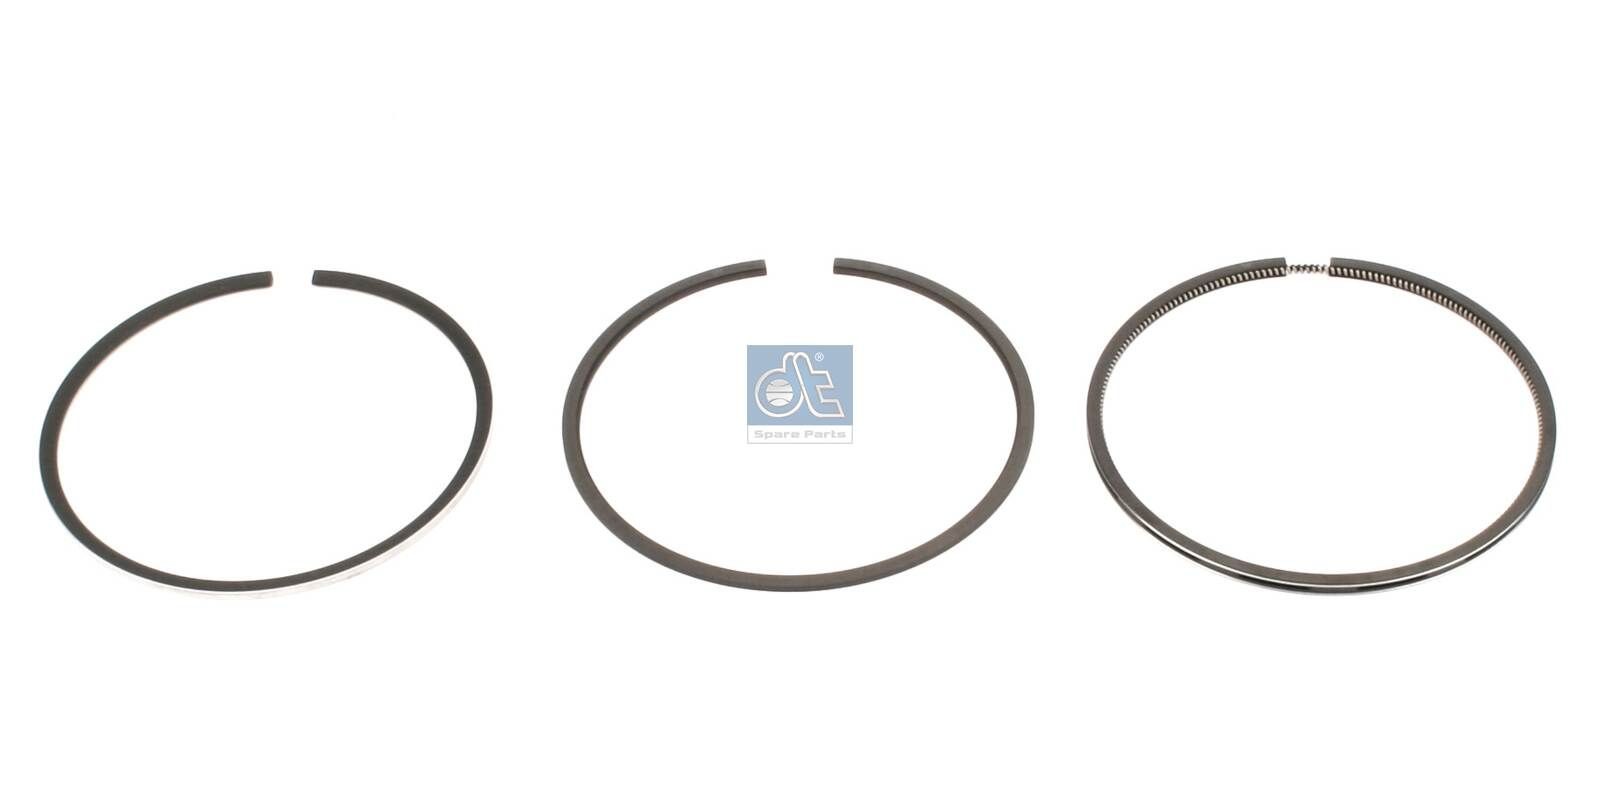 061 06 N0 DT Spare Parts 1.33128 Piston Ring Kit 550254